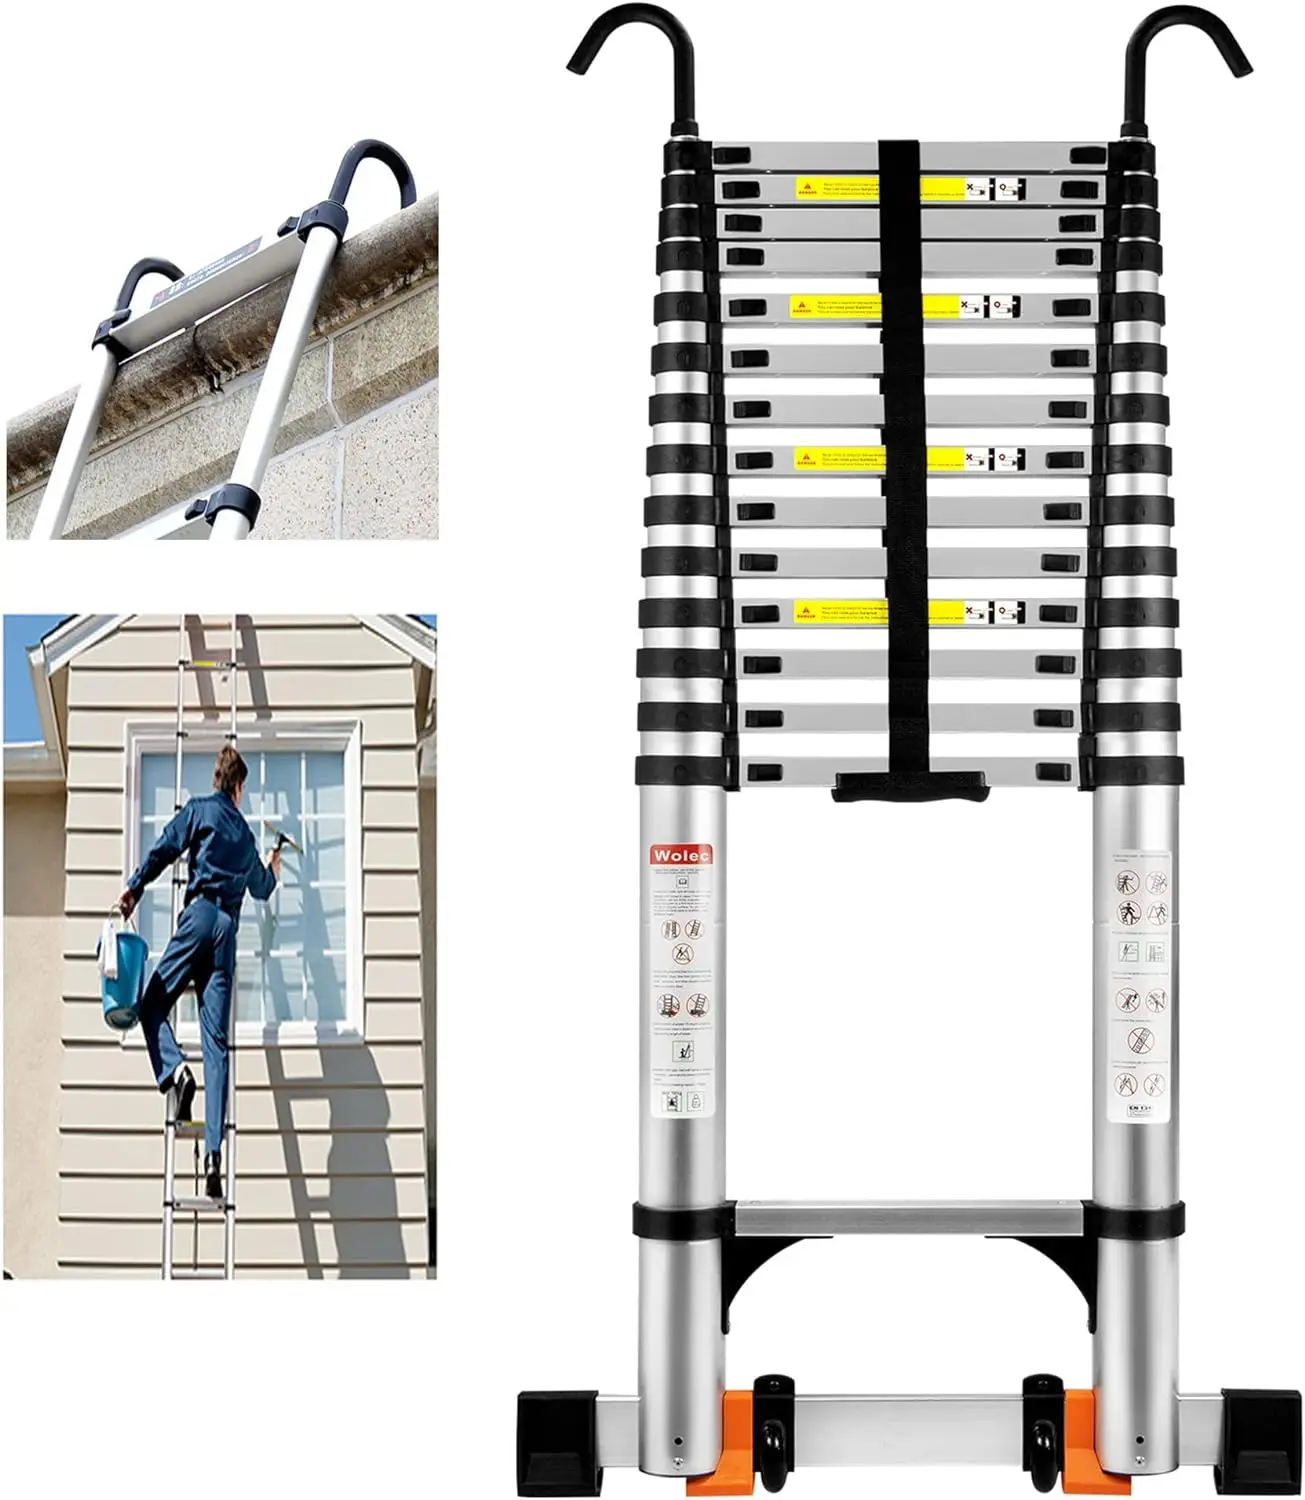 

Wolec 19FT Telescoping Ladder with 2 Detachable Hooks,Reinforced Anti-Pinch Telescopic ladders with 2 Triangle Stabilizers, Port